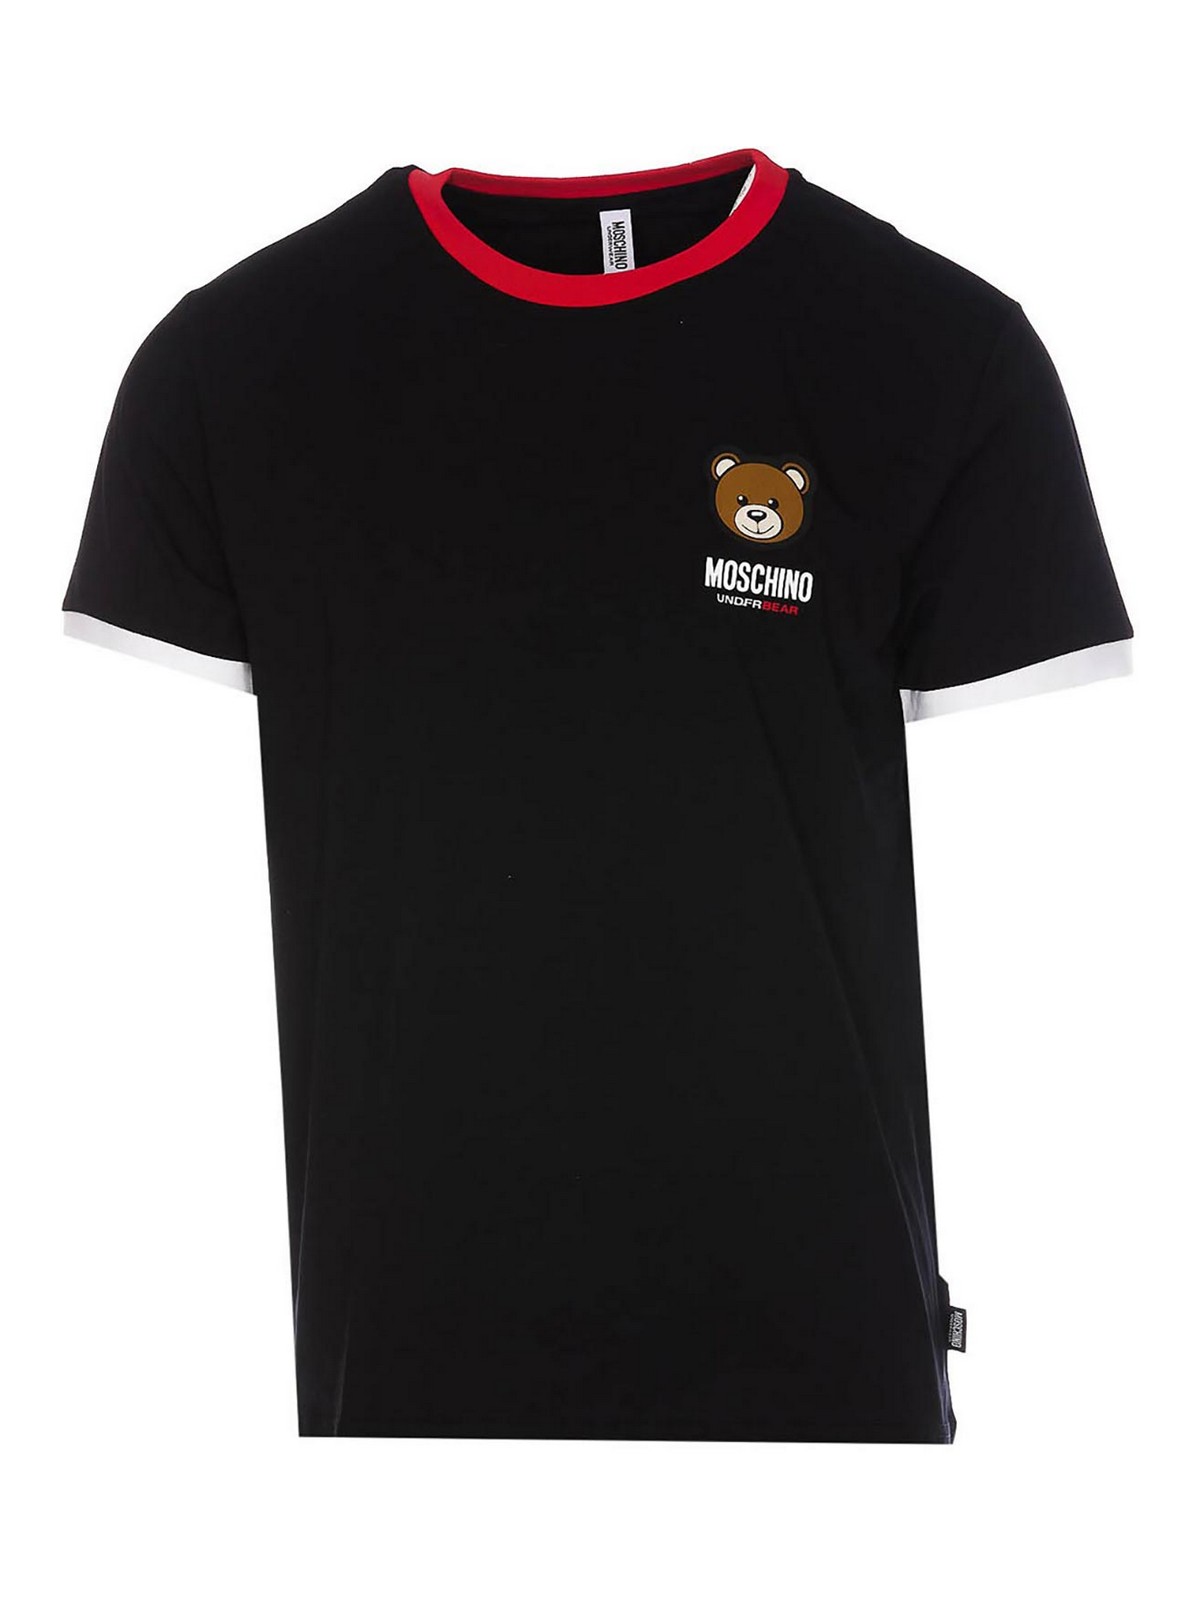 Moschino Shirts & Tops for Women - Official Store